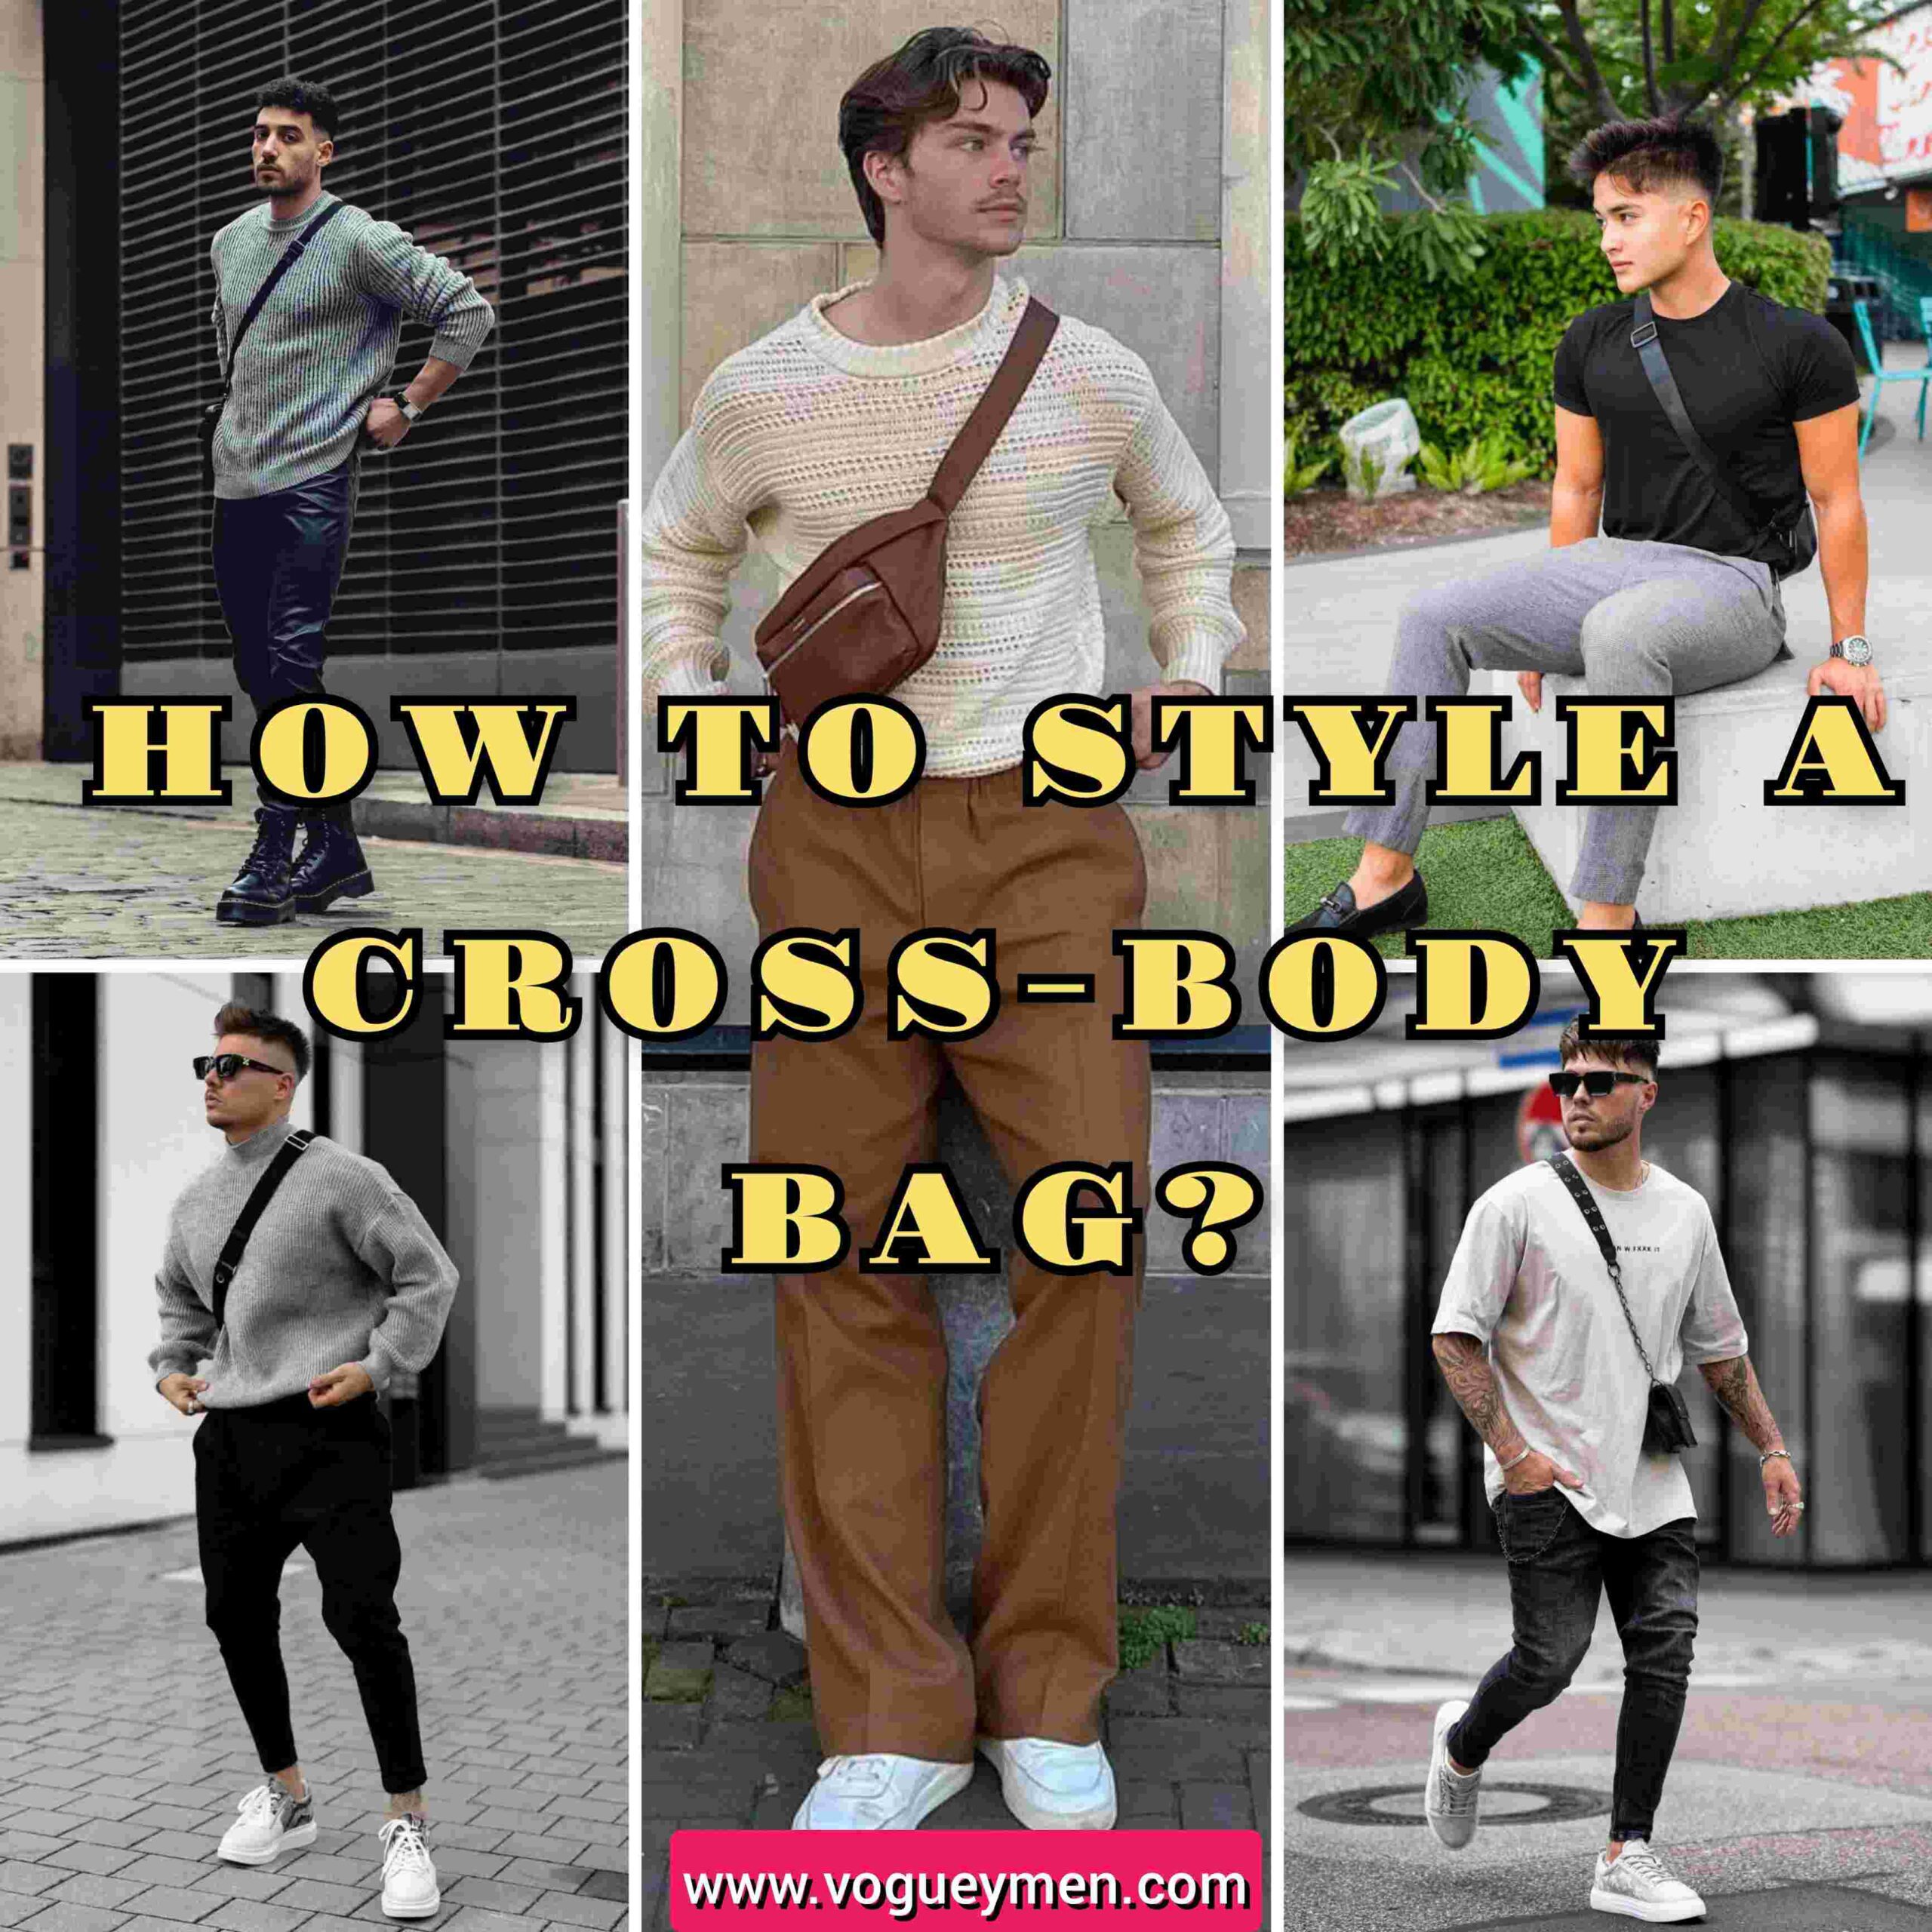 how to style a cross-body bag?